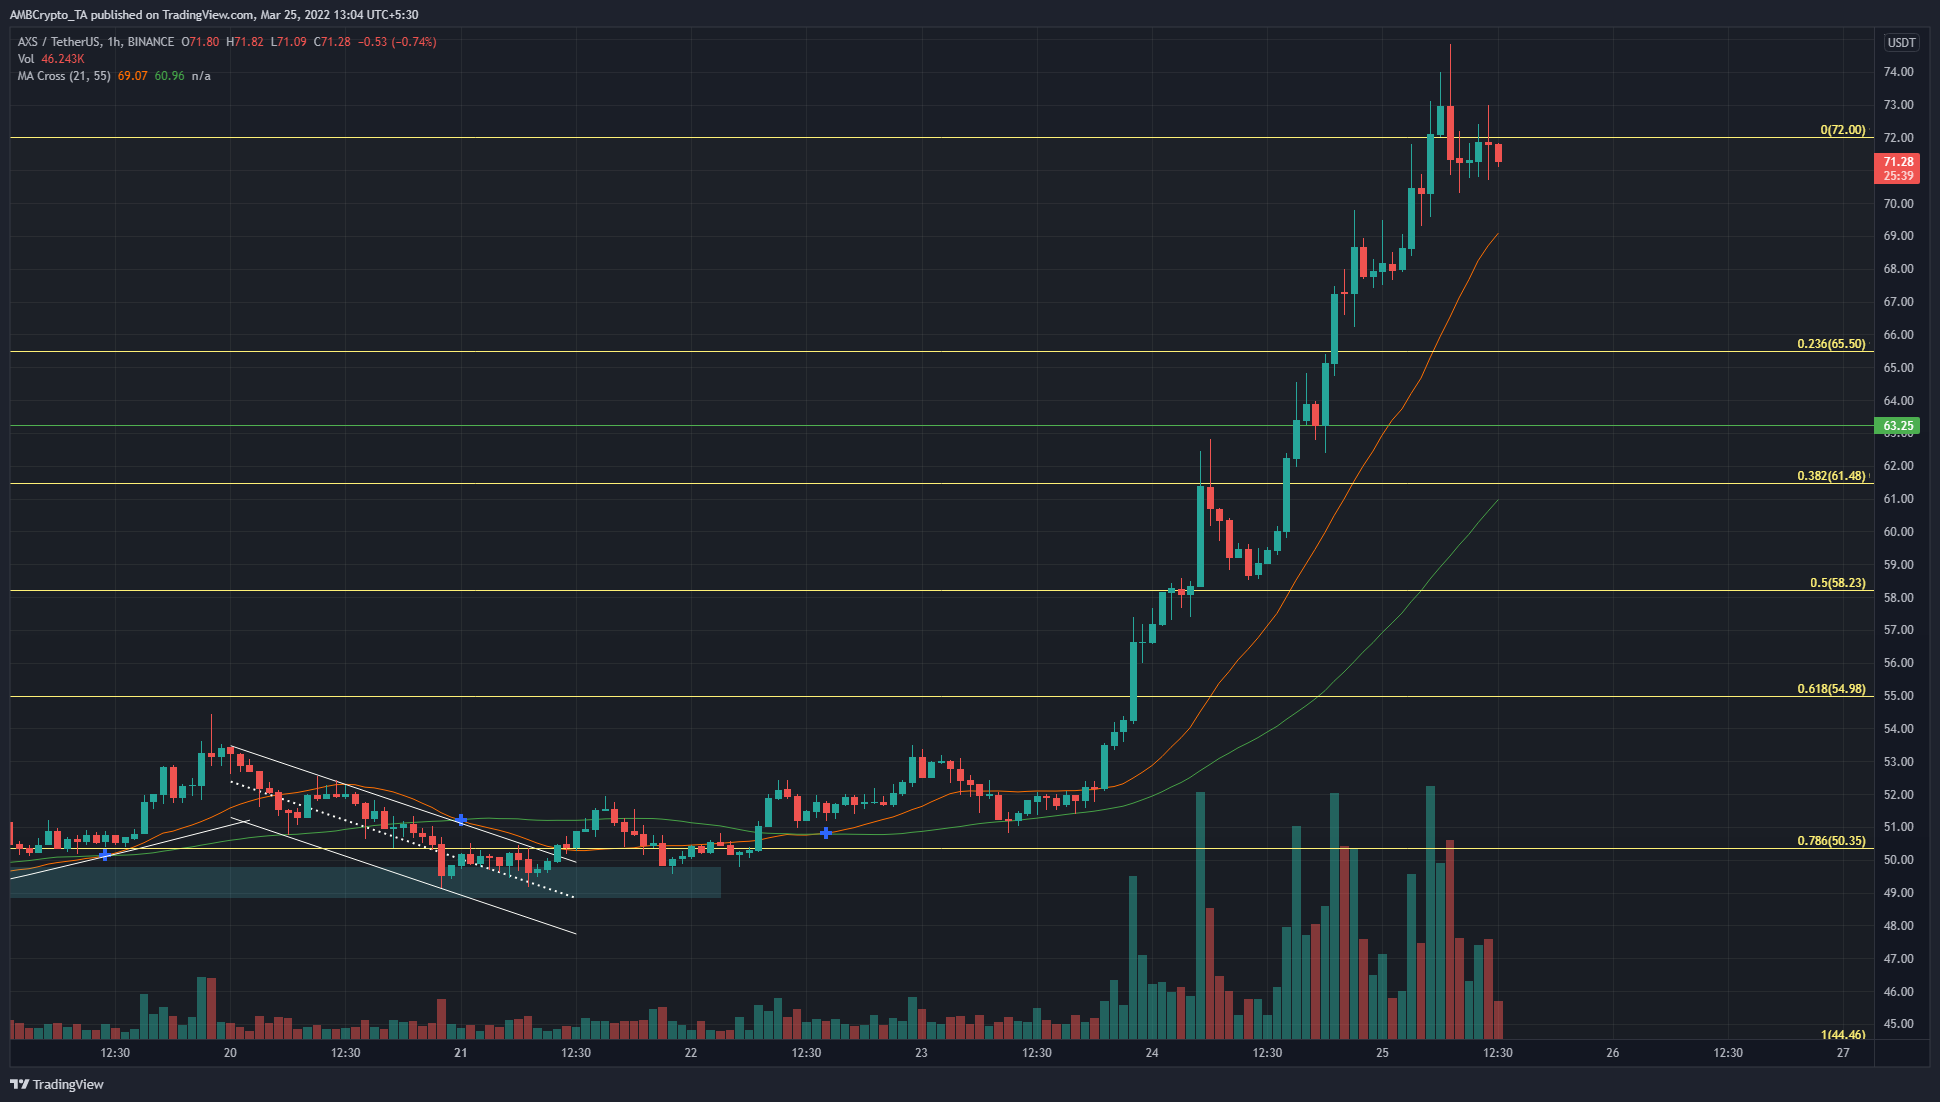 Axie Infinity breaks out of a bullish pattern, registers gains of 44% and counting